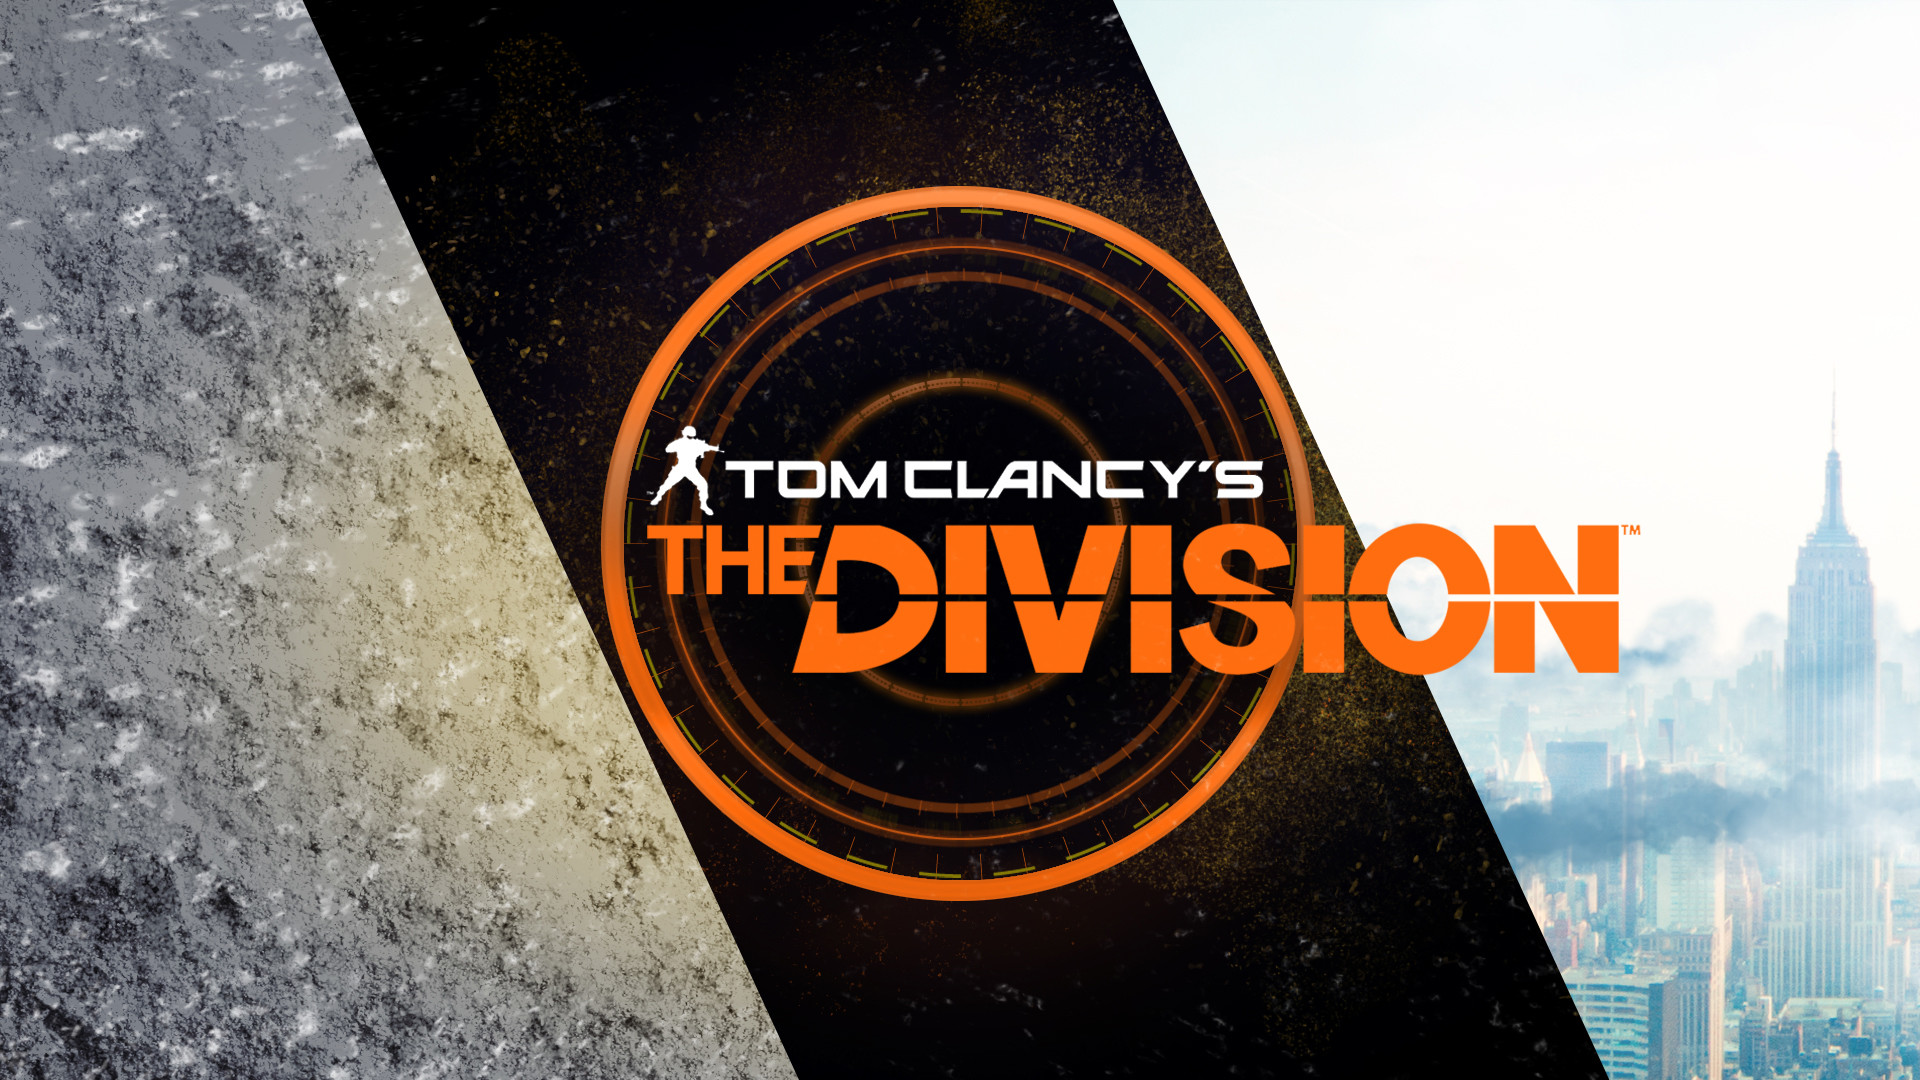 Tom Clancys The Division Wallpaper Pack by ValencyGraphics